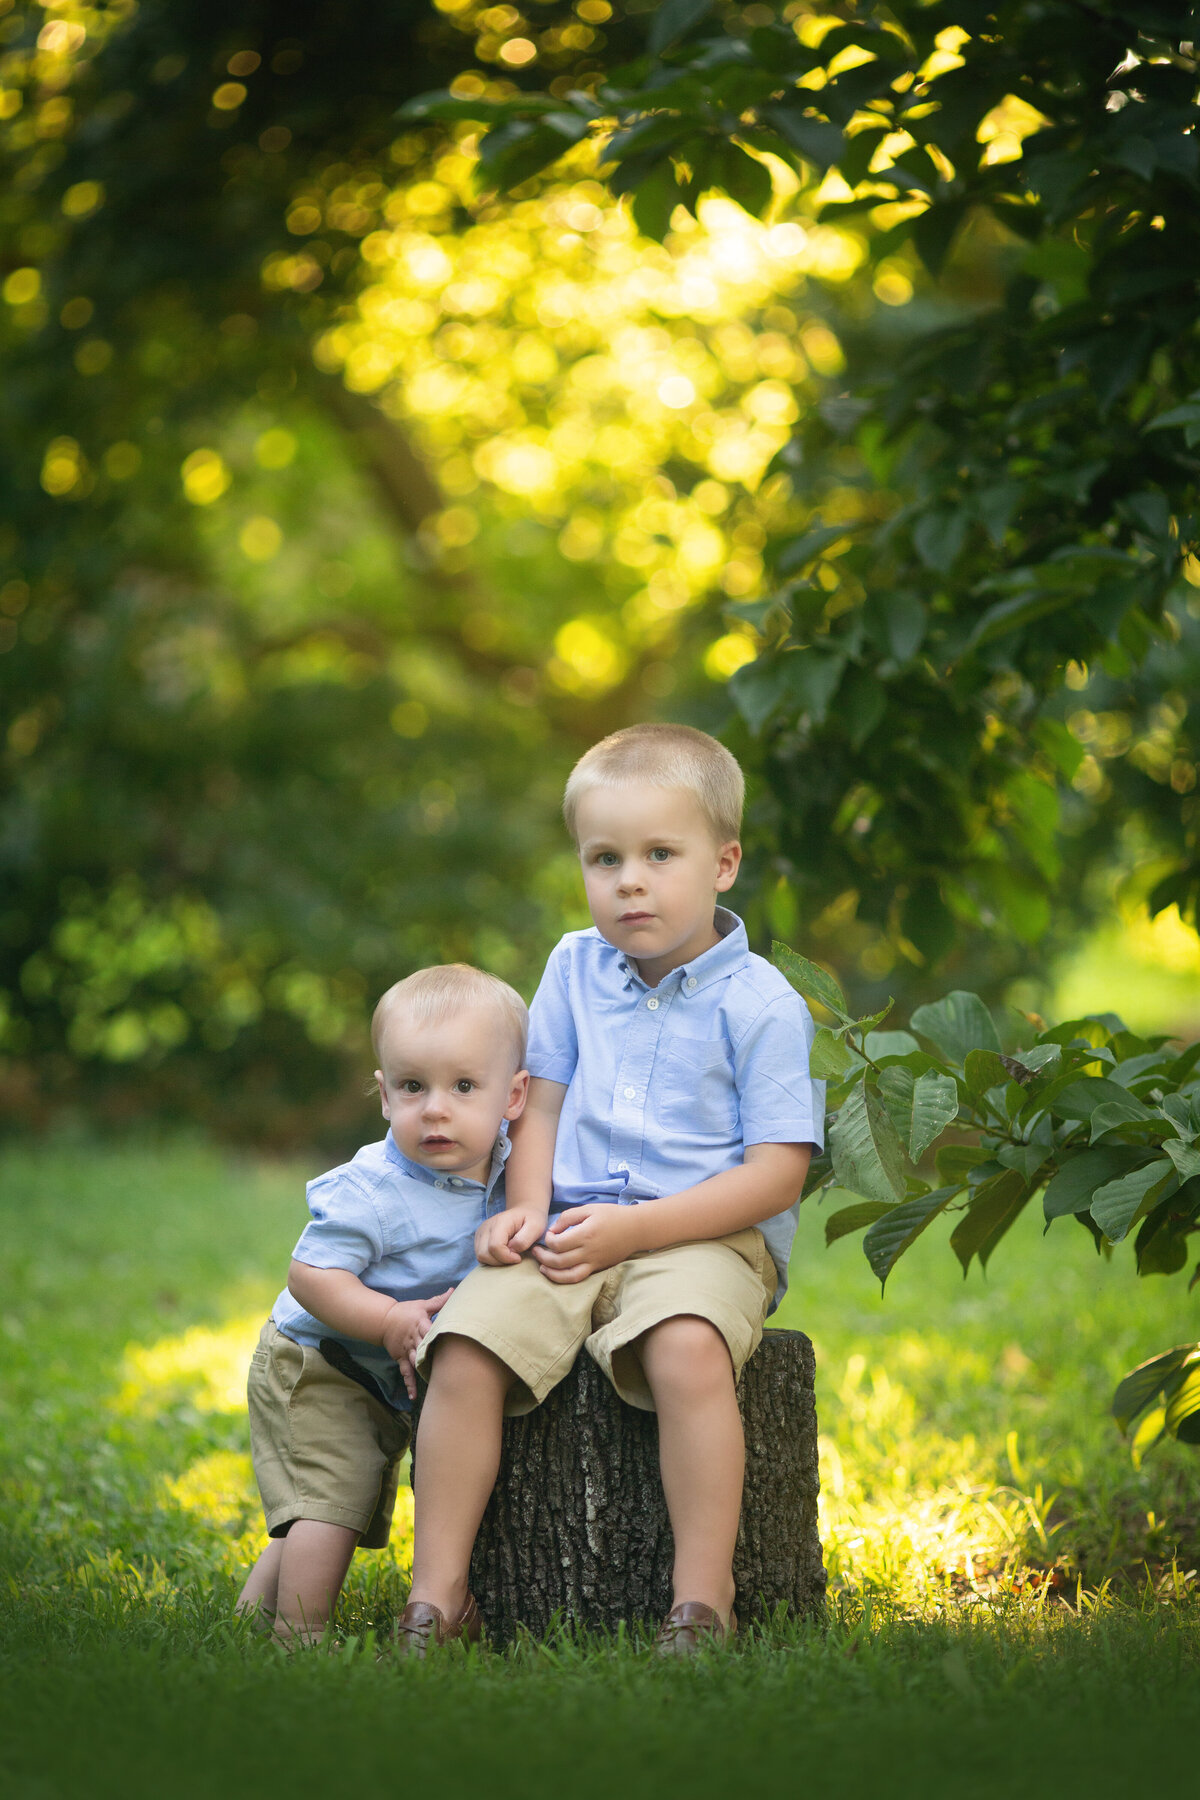 A toddler boy in a blue shirt sits on a stump with his younger brother leaning on him